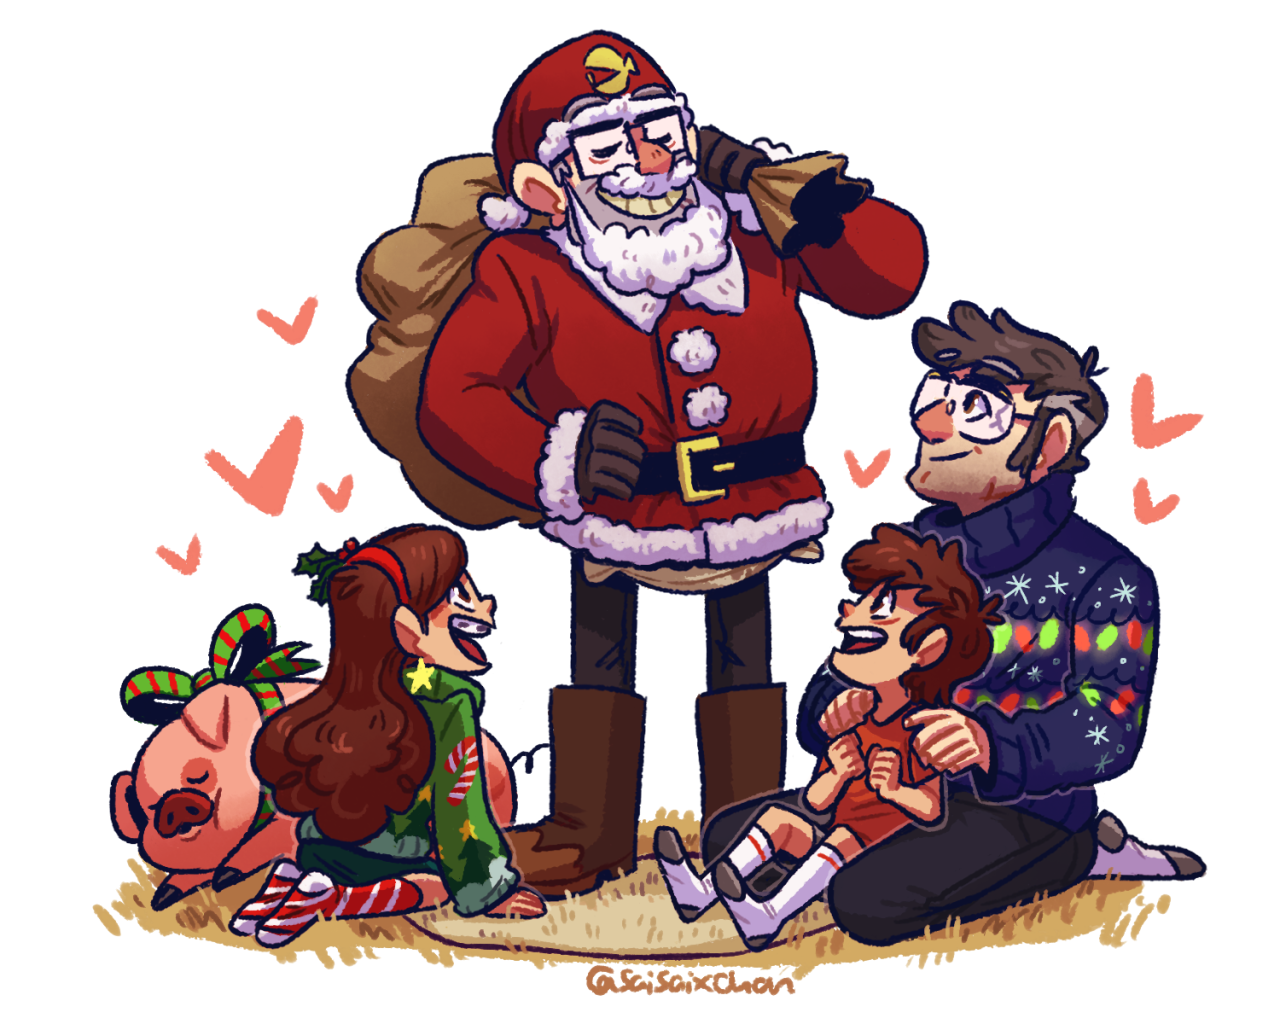 OP: Grunkle Stanta Claus Is Here To Bring Dipper And Mabel Some Awesome Not Stolen, Totally Legally Attained Gifts Stan Took Ford's Shoes In Order To Pull Th. 모험